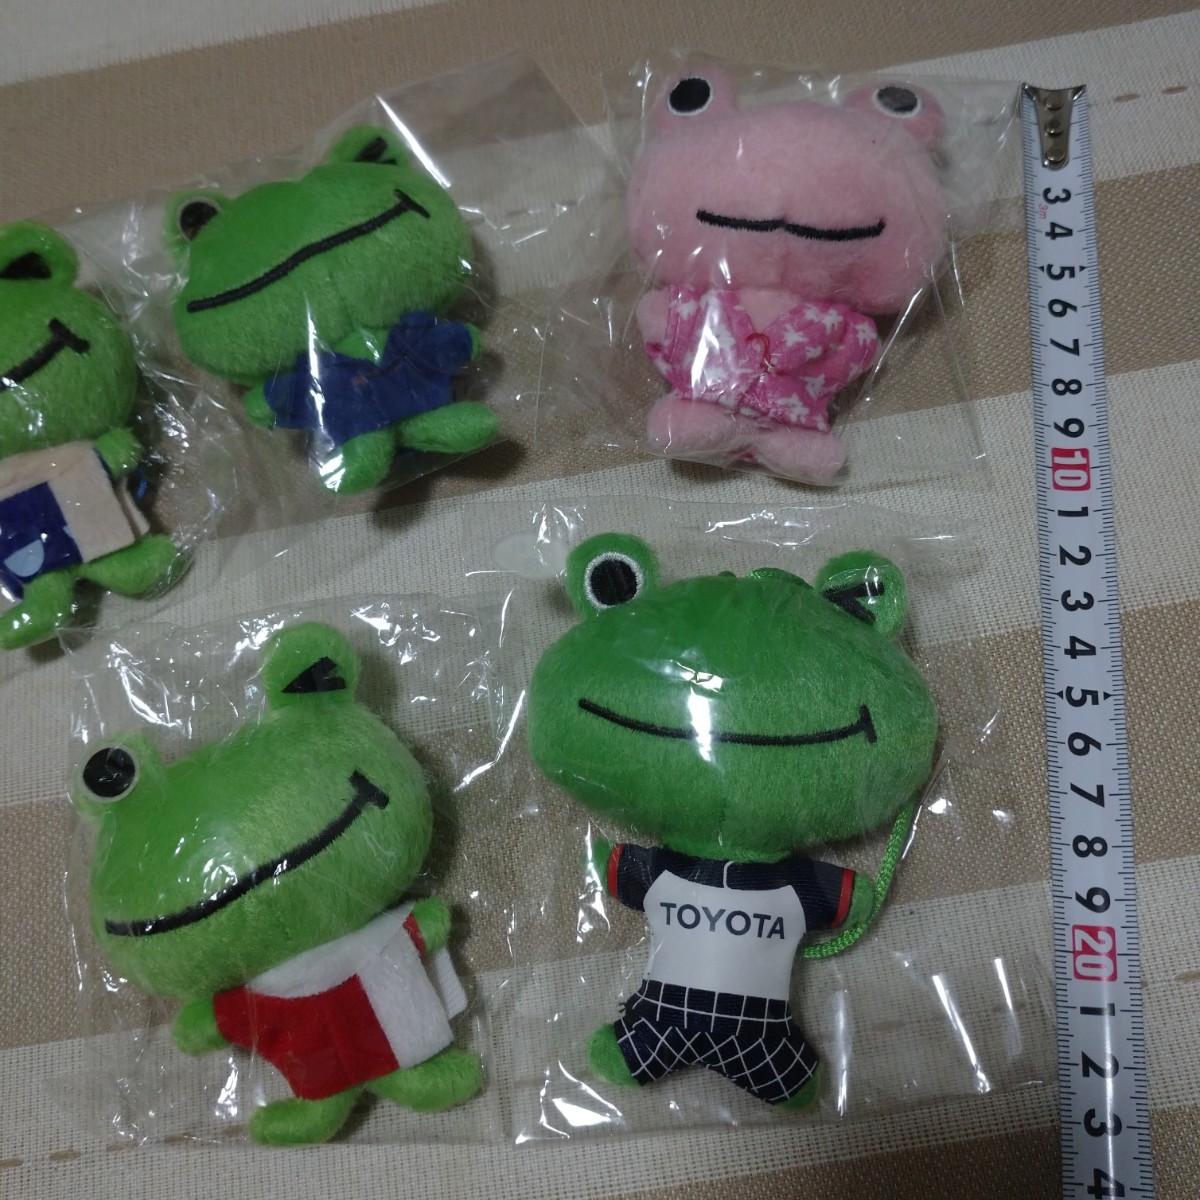 TOYOTA frog マスコット セット グッズ コレクション トヨタ ロゴ 非売品 ノベルティ 限定 カエル limited mascot collection character ⑦_画像3